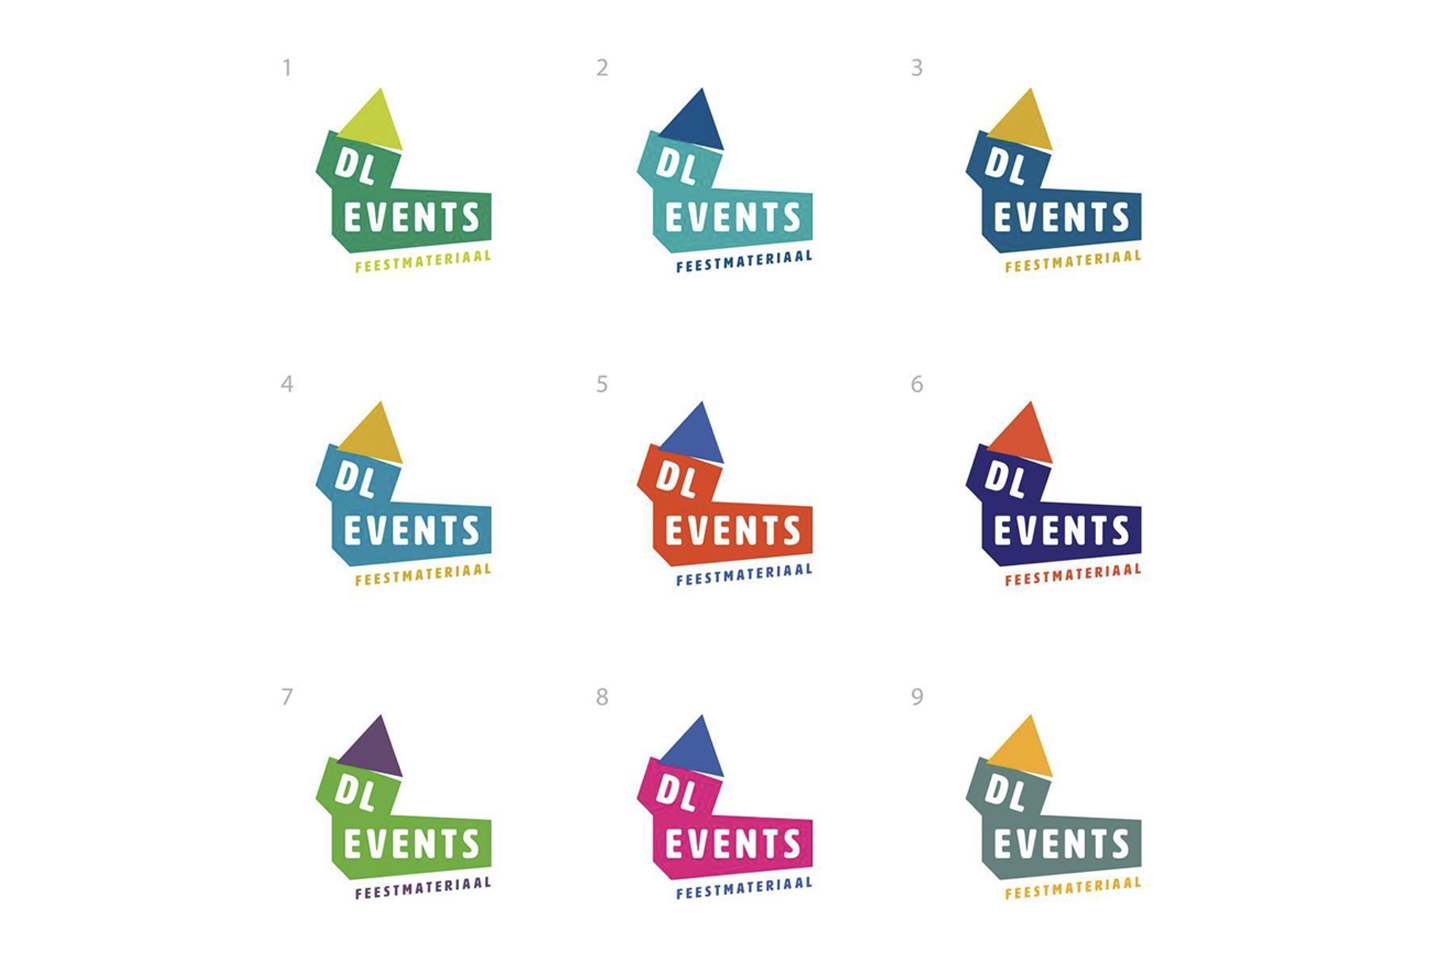 DL Events 2